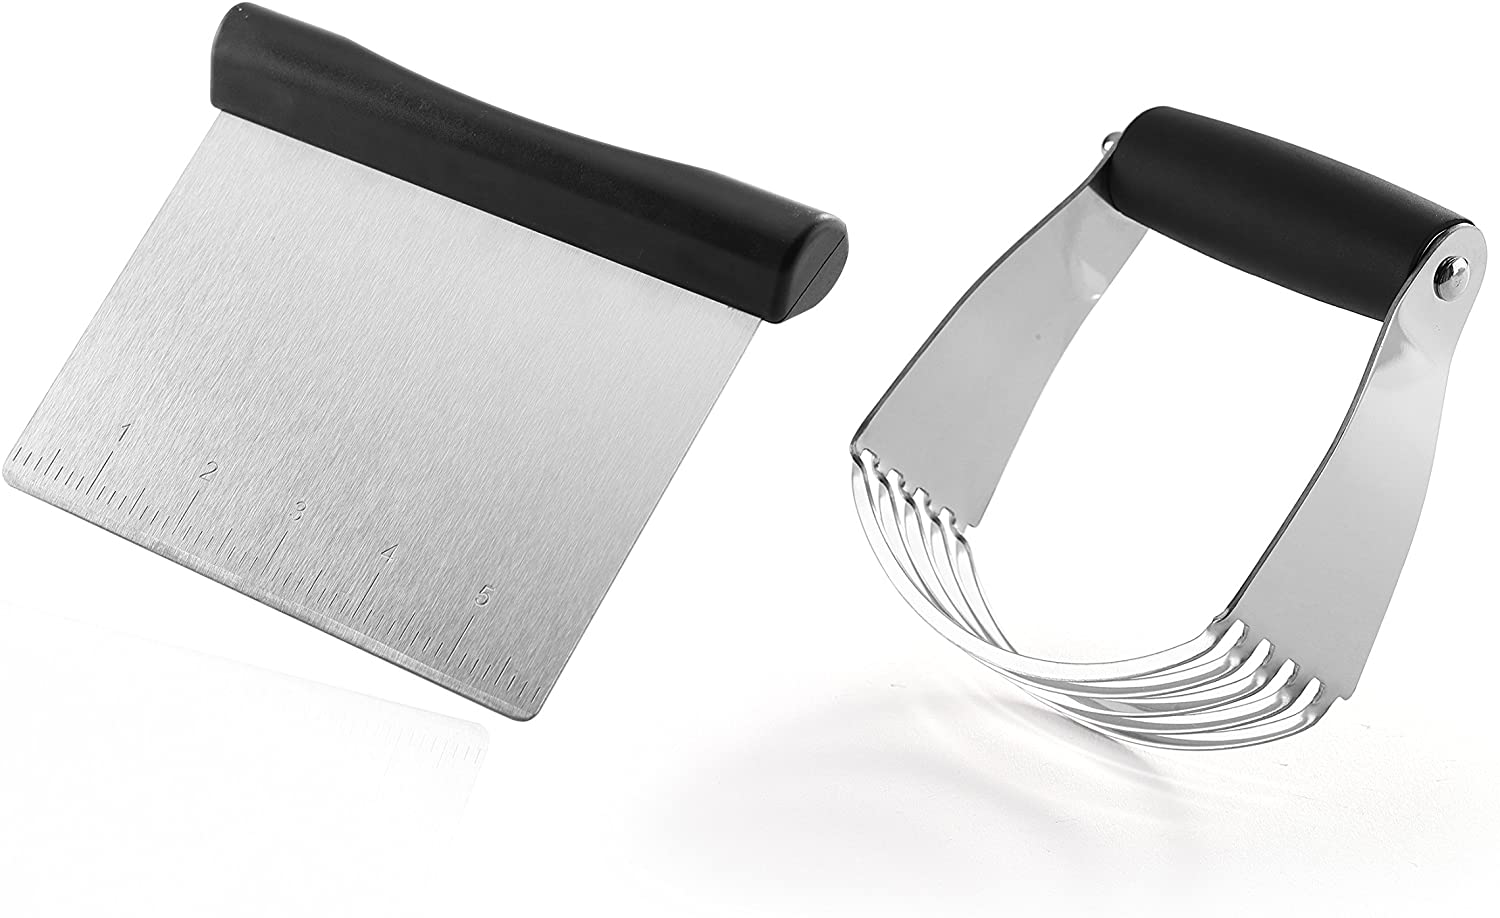 Spring Chef - Bench Scraper, Stainless Steel Nut, Pie, Pastry, Pizza and  Dough Cutter, Kitchen Essential for Cleaning Counters, Includes Bowl  Scraper